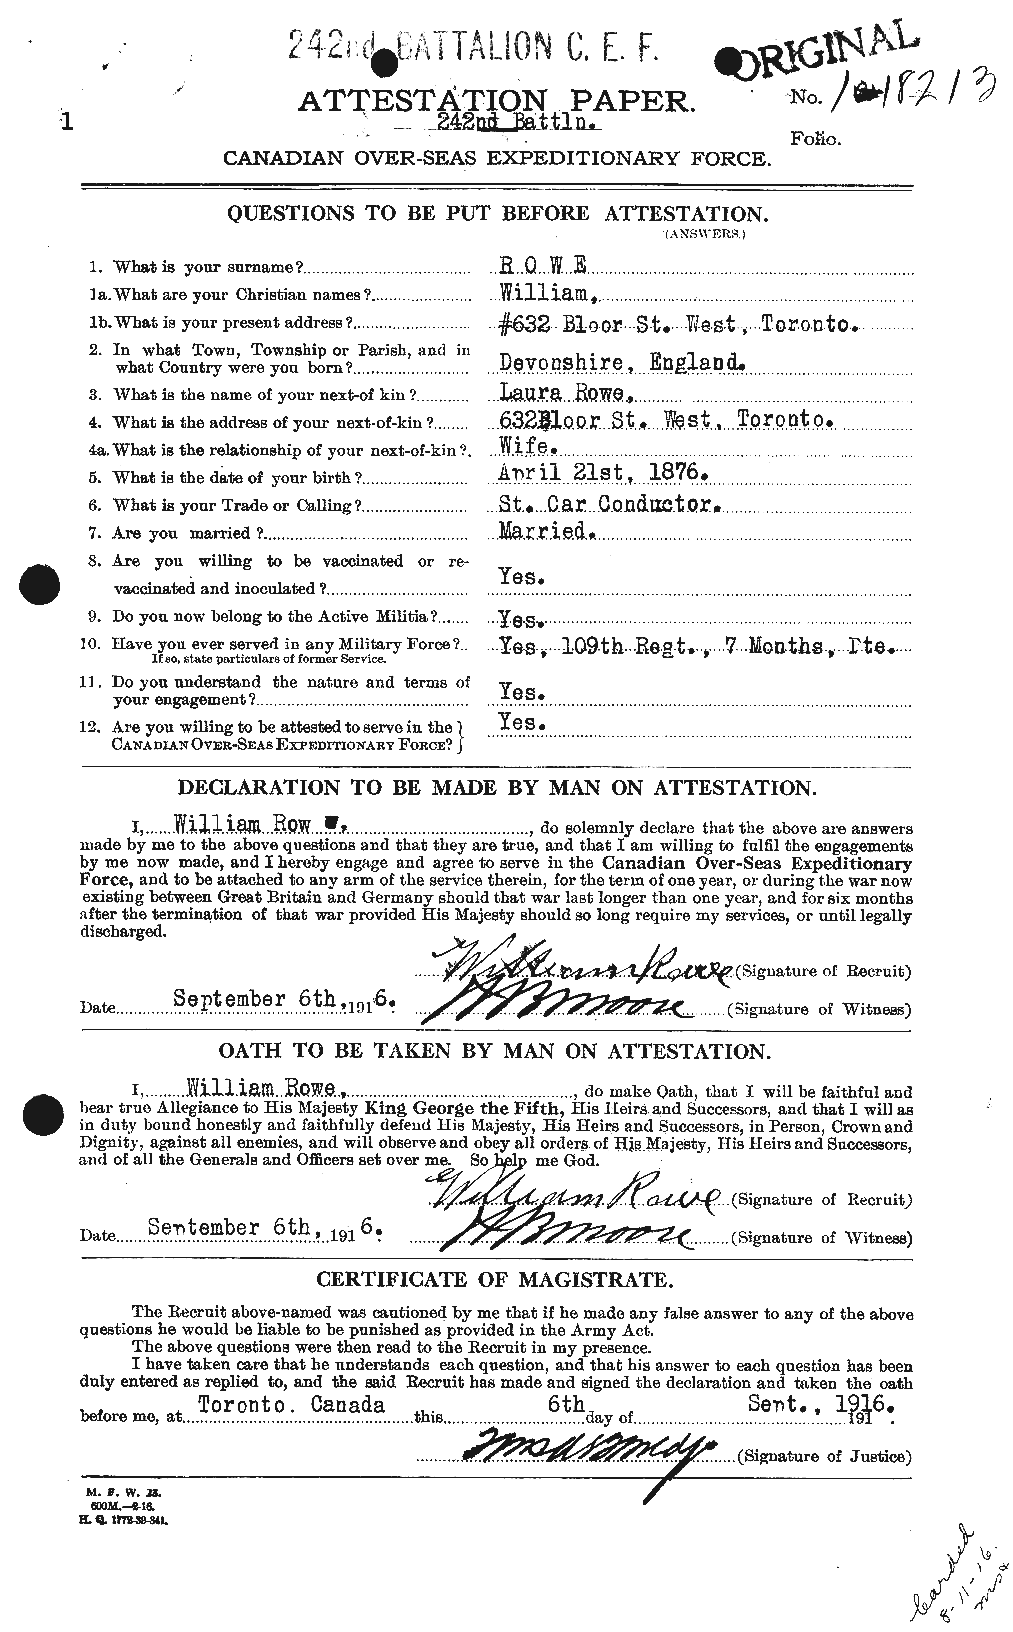 Personnel Records of the First World War - CEF 616018a